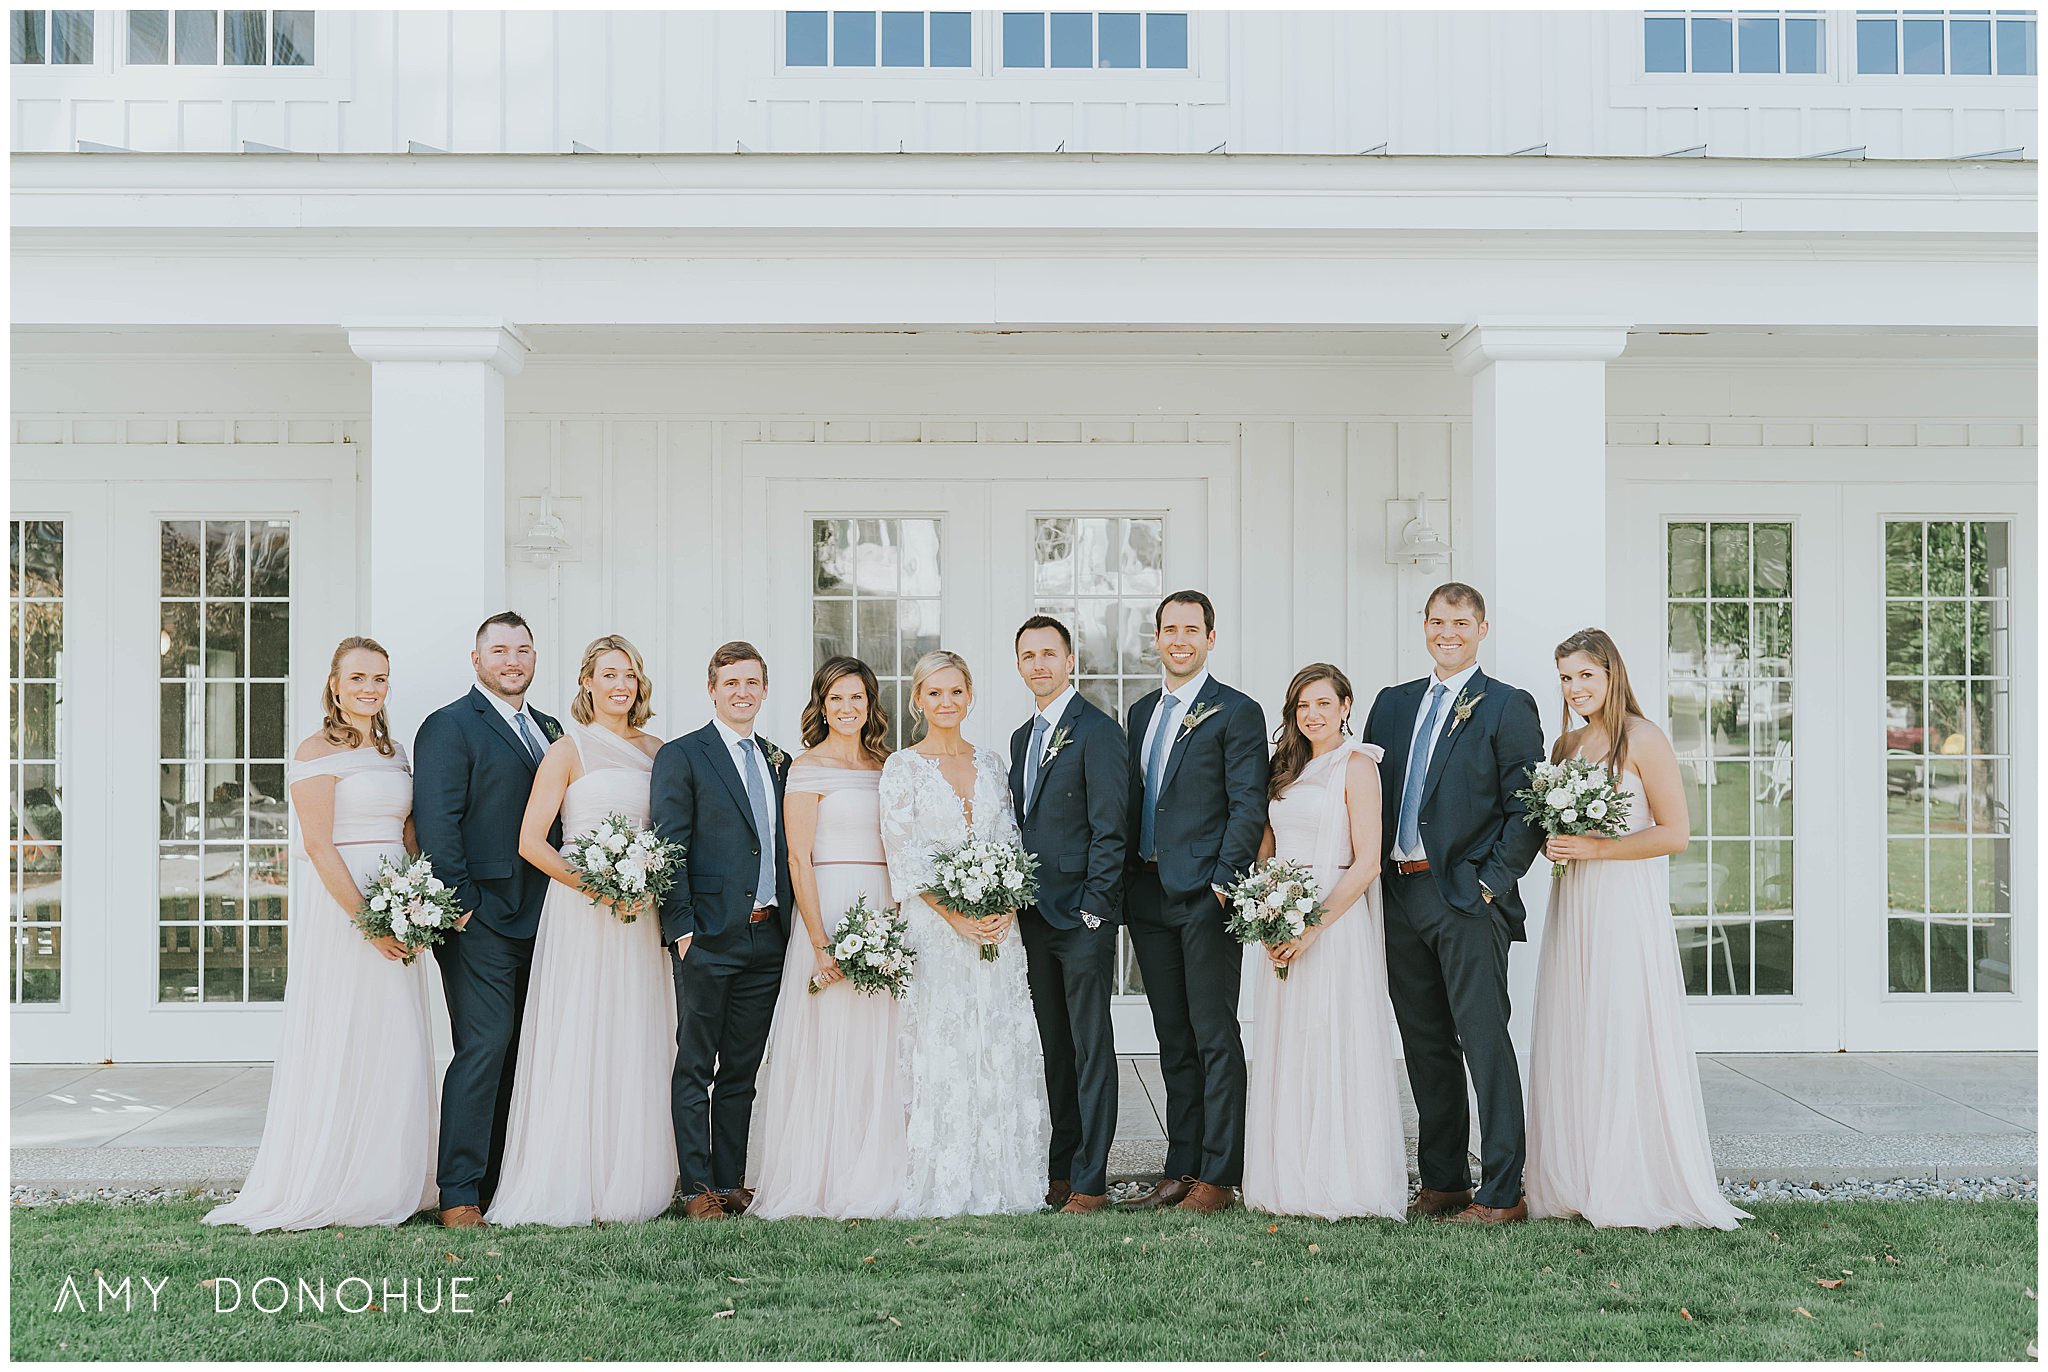 Wedding Party Portraits at the Equinox Resort Wedding with florals by Jasper and Prudence | Vermont Wedding Photographer | © Amy Donohue Photography